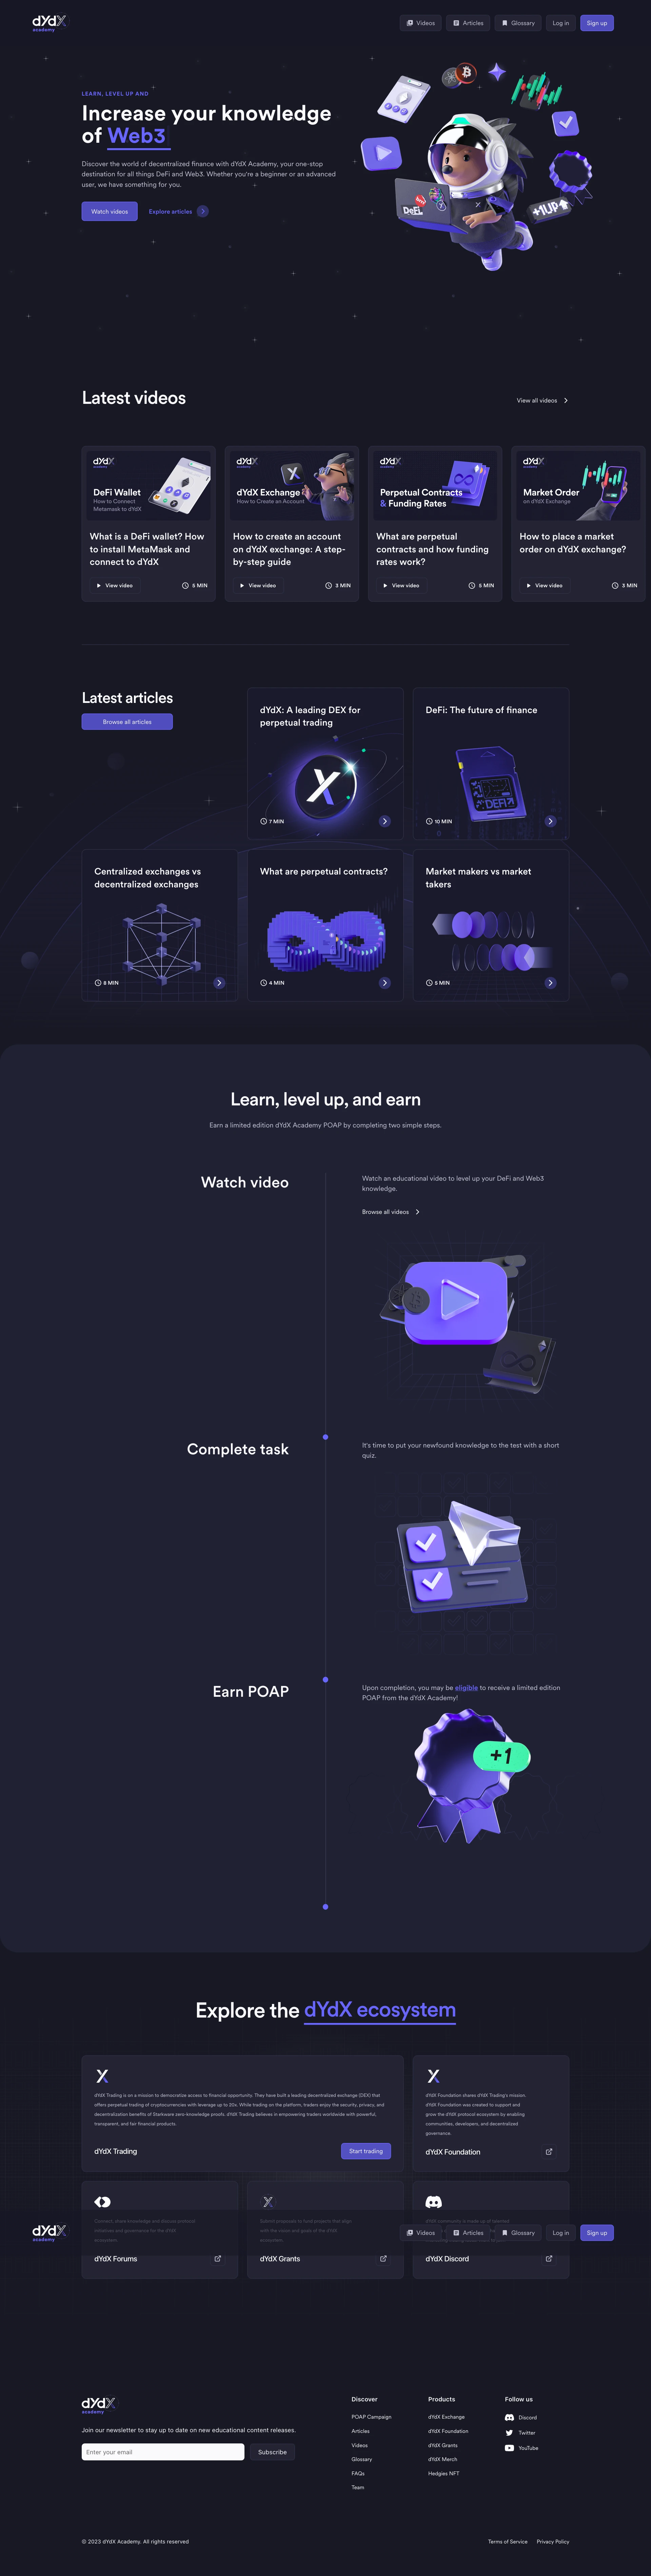 dYdX Academy Landing Page Example: Discover the world of decentralized finance with dYdX Academy, your one-stop destination for all things DeFi and Web3. Whether you're a beginner or an advanced user, we have something for you.